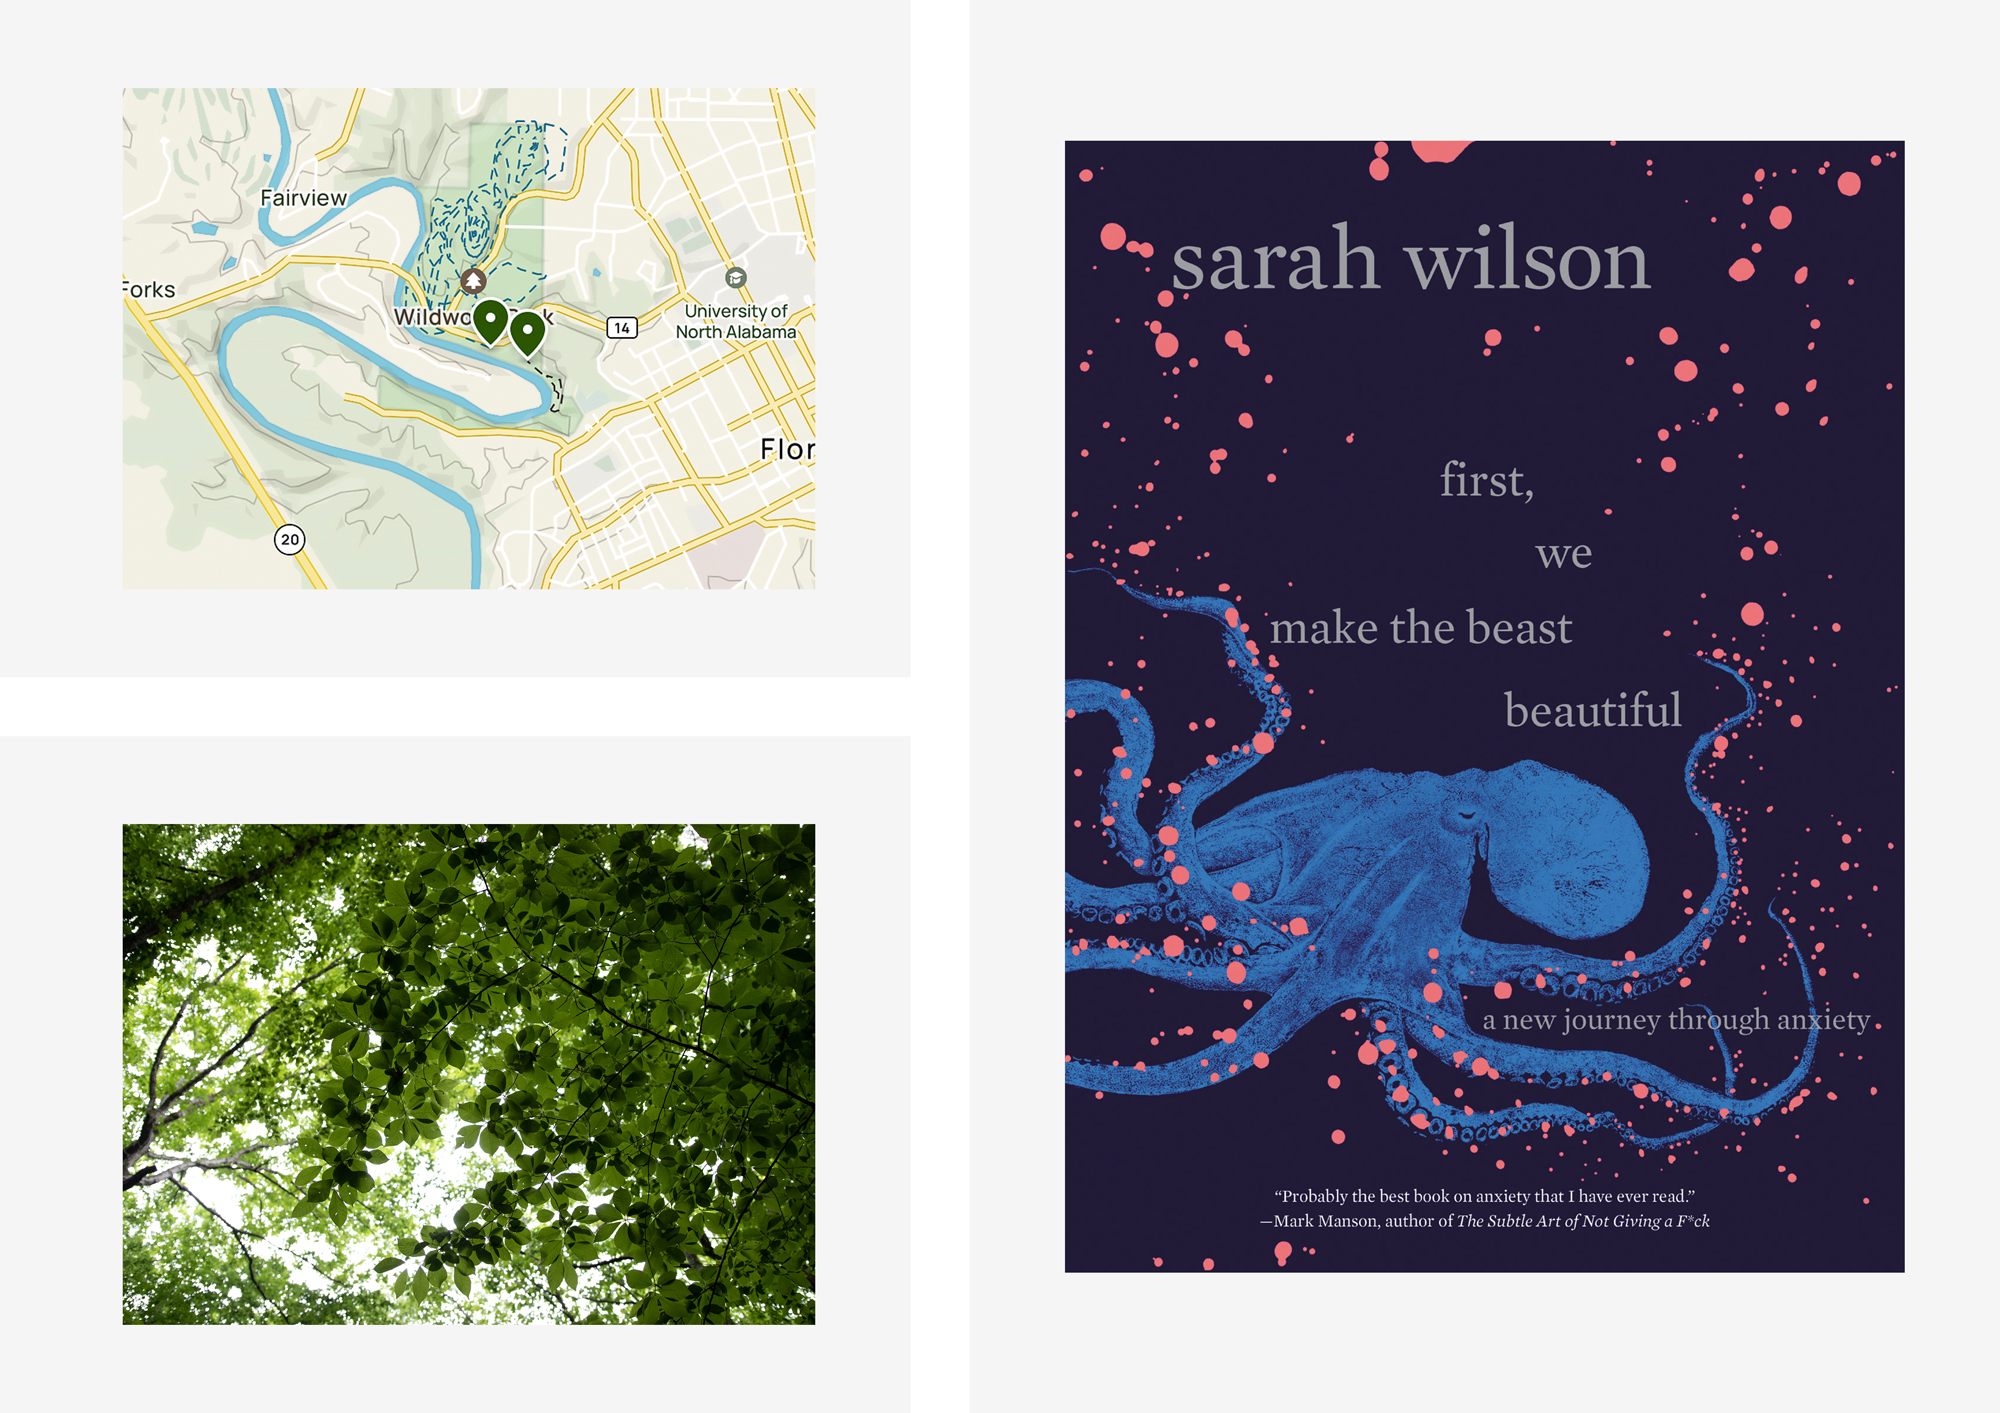 Collage of a map of Wildwood Park, an image of green tree branches, and the cover of Sarah Wilson's book "First, We Make the Beast Beautiful."